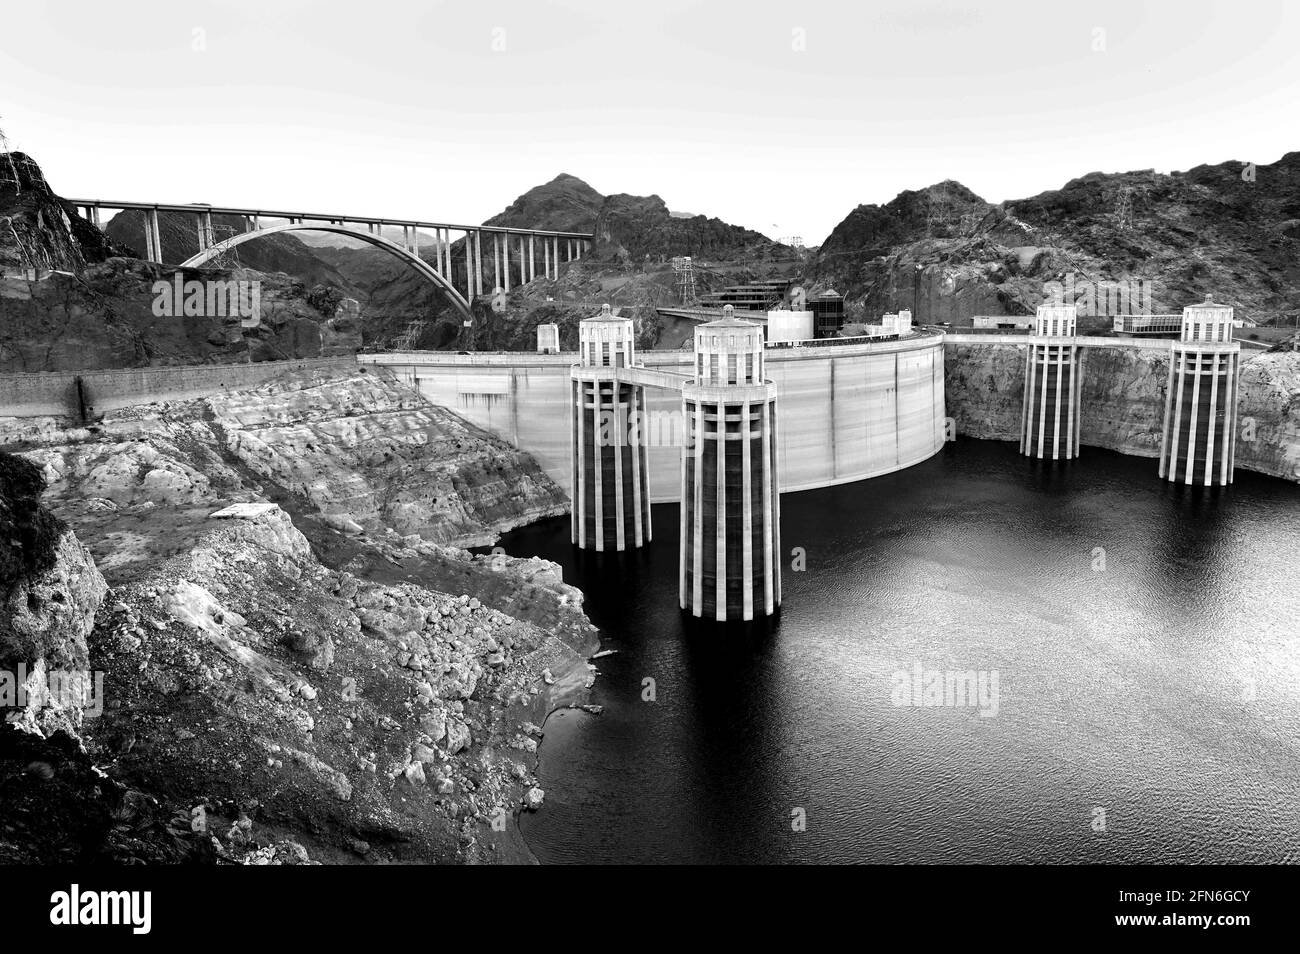 Lake Mead Nra U.S. 13th May, 2021. (EDITORS NOTE: Image has been converted to black and white.) The Hoover Dam is seen in the Black Canyon of the Colorado River on the border between Arizona and Nevada. Hoover Dam, completed in 1936, impounds Lake Mead, the largest reservoir in the United States by volume. Hoover Dam is a major tourist attraction; nearly a million people tour the dam each year. The dam's generators provide power for public and private utilities in Nevada, Arizona, and California. Credit: David Becker/ZUMA Wire/Alamy Live News Stock Photo